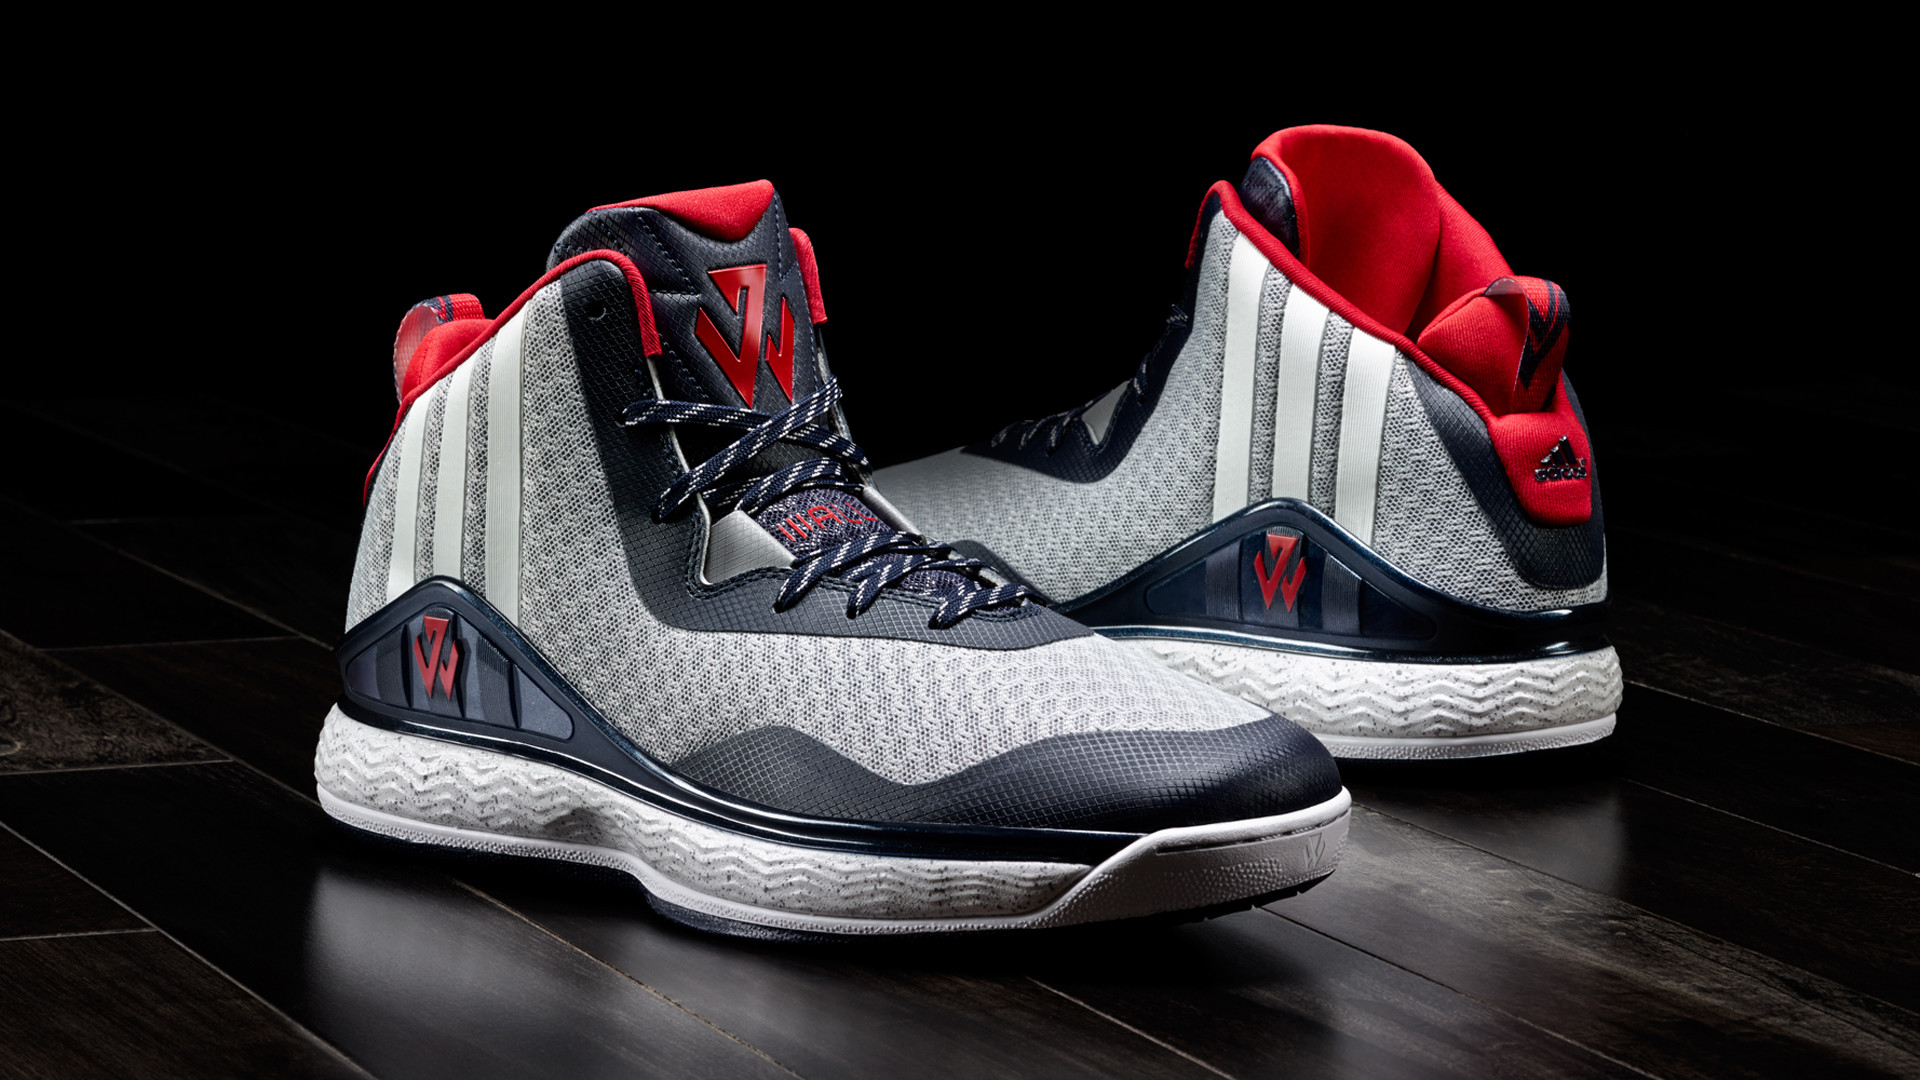 John Wall Gets First Signature Shoe From Adidas, The - Shoes For Basketball Players - HD Wallpaper 